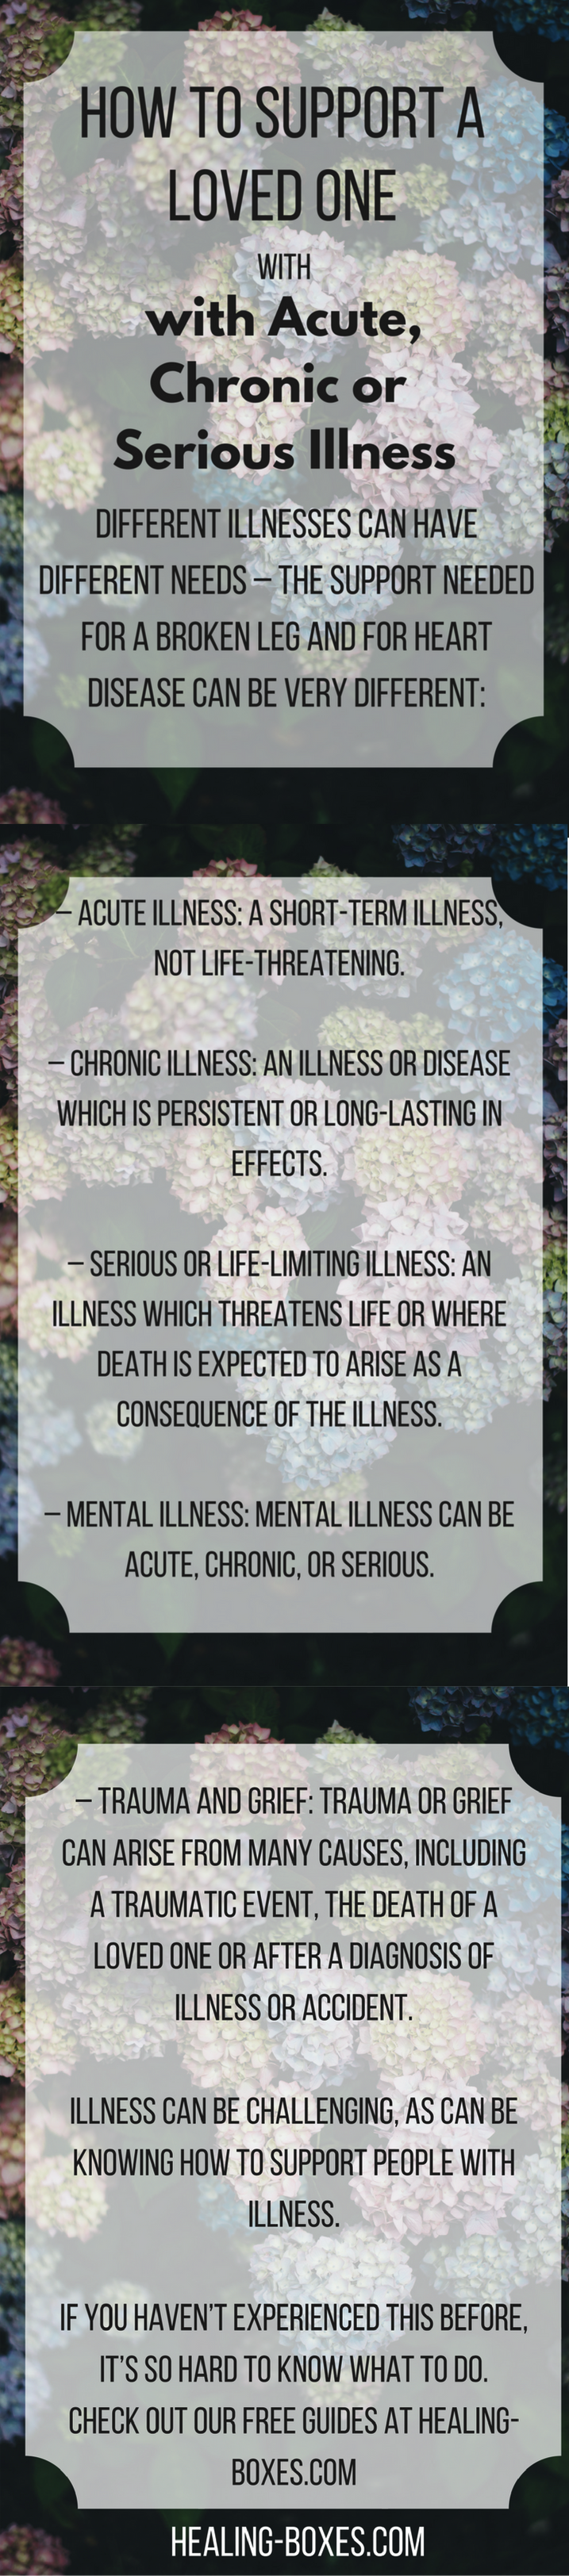 Pinterest Graphic: text is the first paragraphs of article on top of image of hydrangeas: Illness is challenging, and so is knowing how to support people with illness. If you haven’t experienced this before, it’s so hard to know what to do. Different illnesses can have different needs – the support needed for a broken leg and for heart disease can be very different. – Acute illness: a short-term illness, not life-threatening. – Chronic illness: an illness or diseases which is persistent or long-lasting in it’s effects. – Serious or life limiting illness: an illness which threatens life or where death is expected to arise as a consequence of the illness. – Mental illness: mental illness can be acute, chronic, or serious. – Trauma and grief: trauma or grief can arise from many causes, including a traumatic event, the death of a loved one or after a diagnosis of illness or accident.